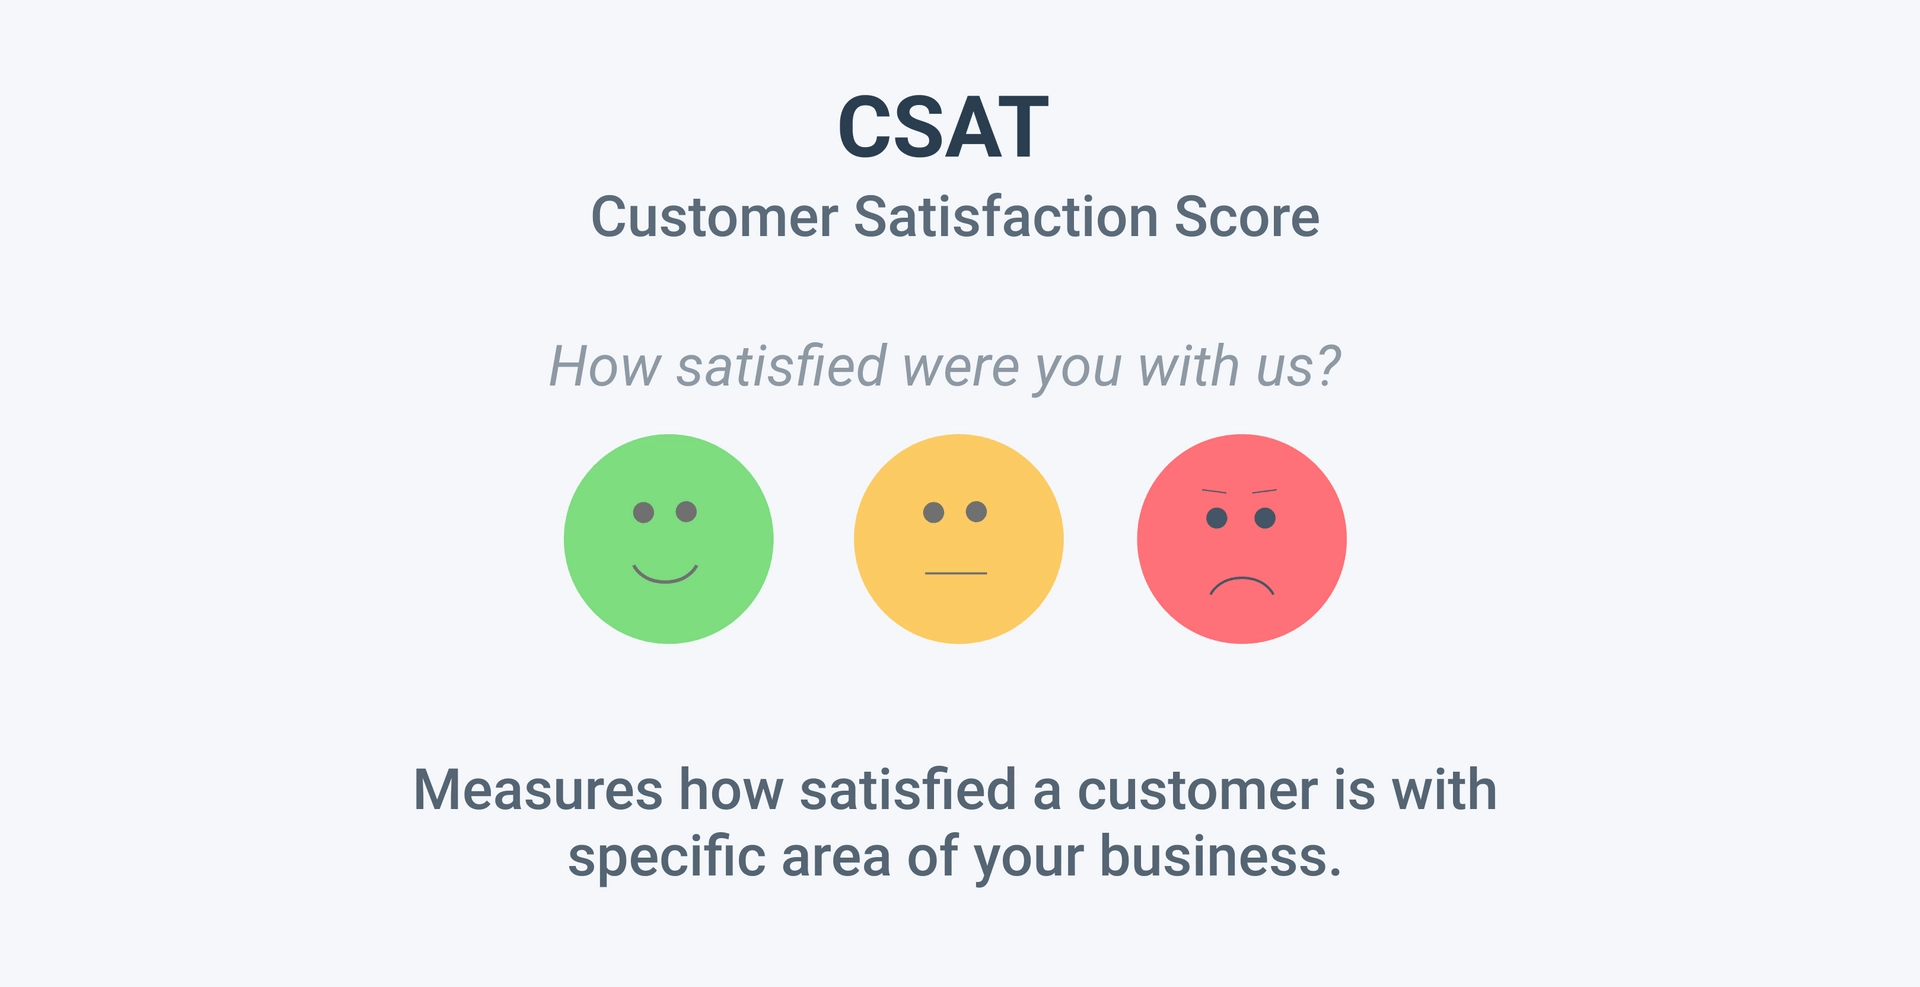 CSAT- How satisfied were you with us today?